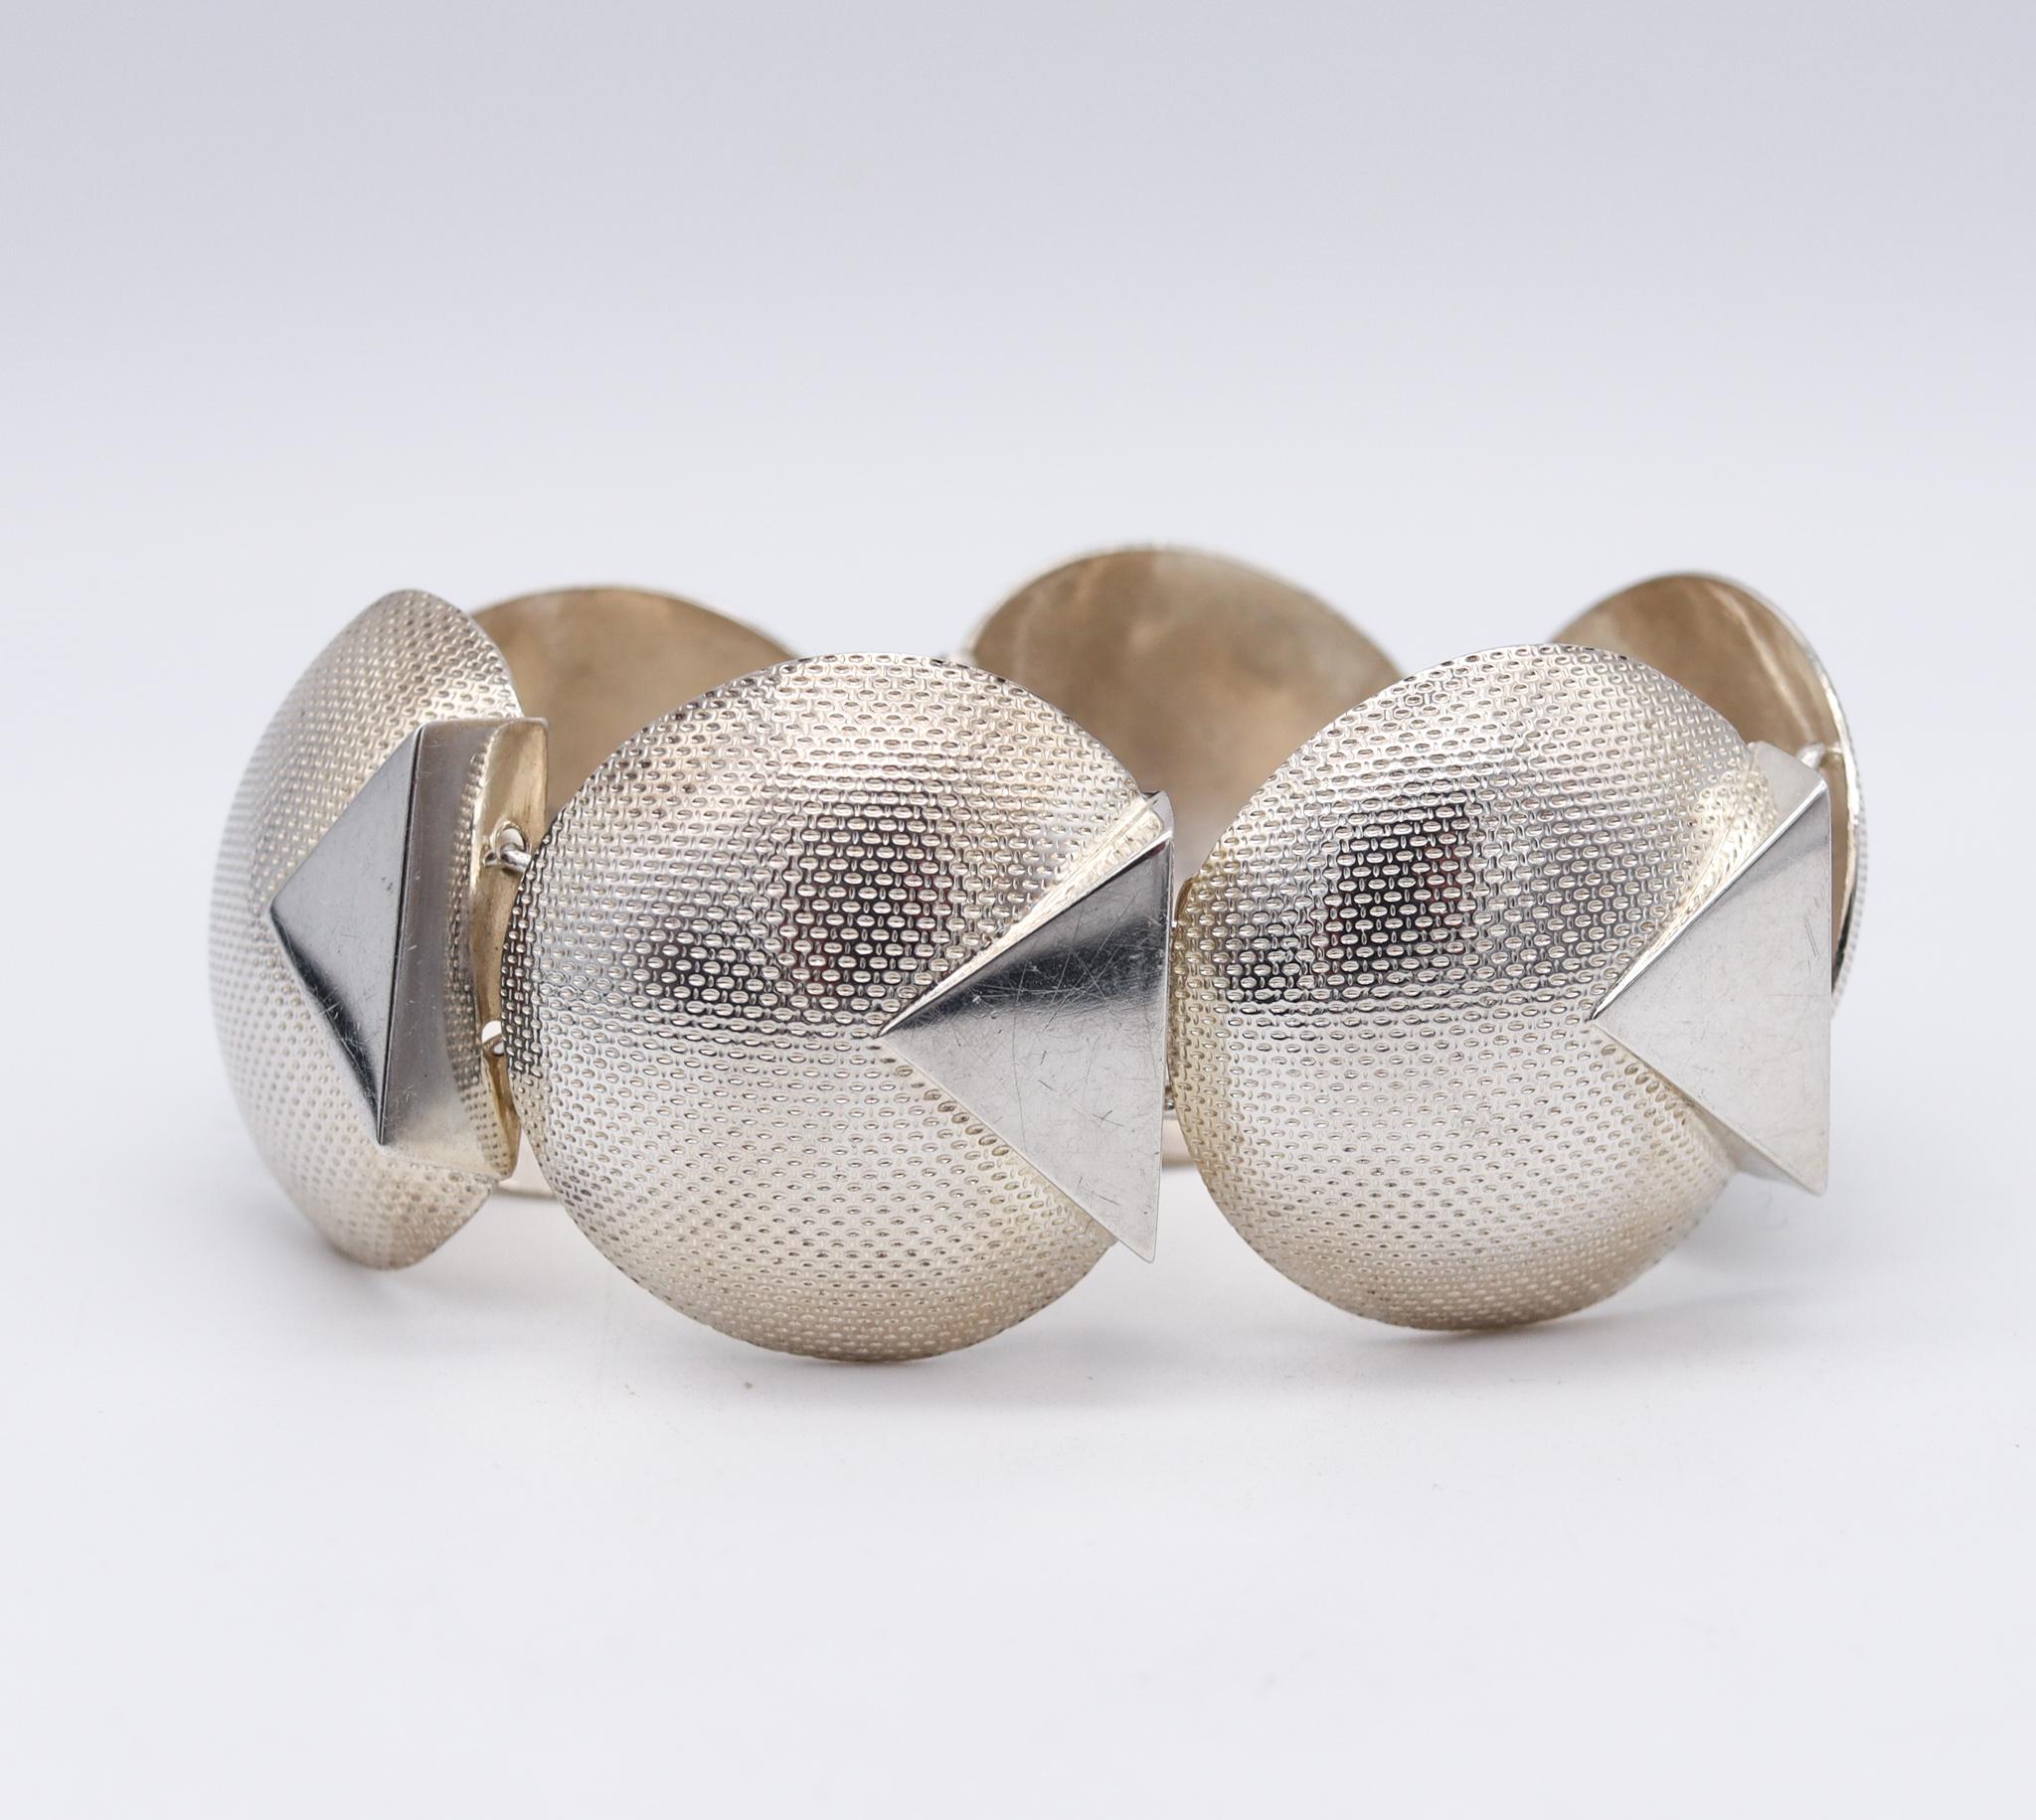 A British postmodernism memphis bracelet.

Beautiful postmodernist piece, created in London United Kingdom back in the 1987. This geometric unusual bracelet was crafted in solid .925/.999 sterling silver with polished and textured finish. The design